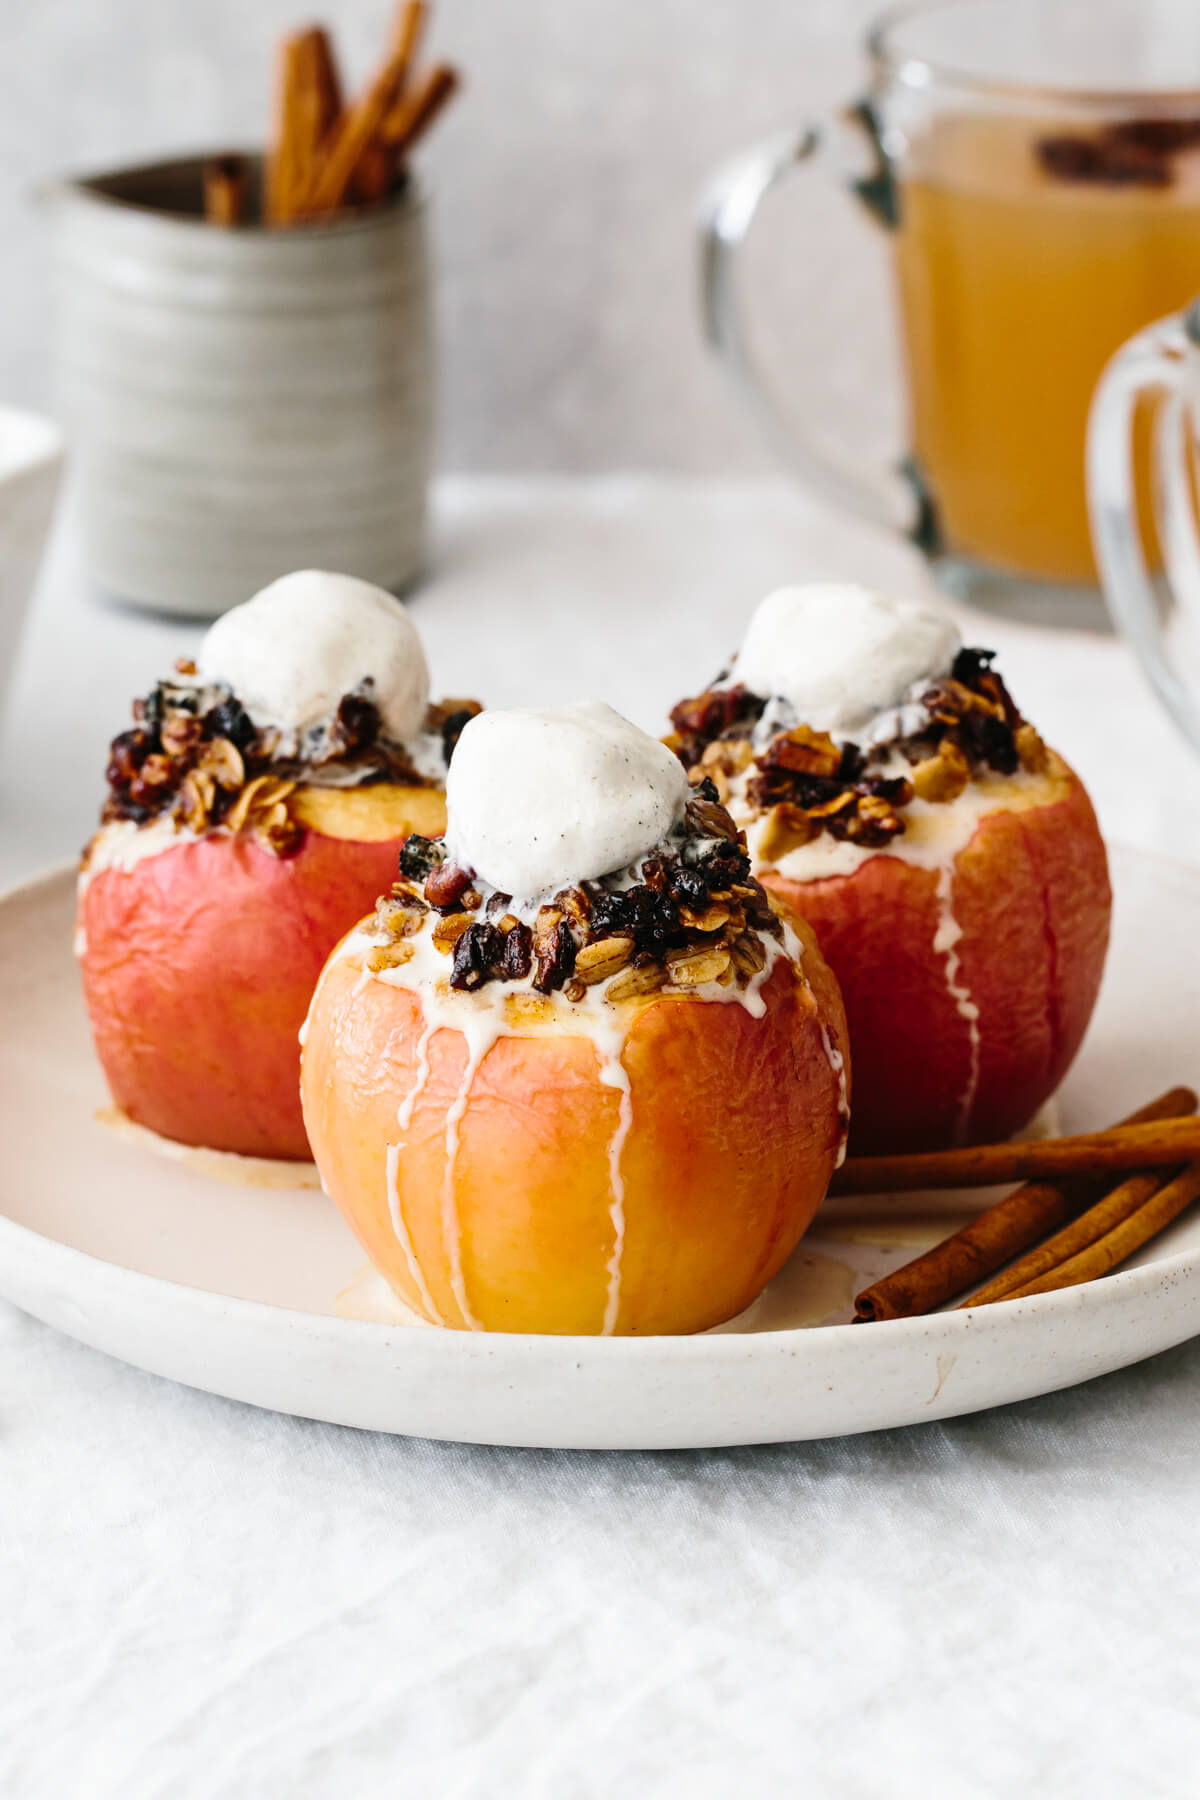 Three baked apples on a plate with melted ice cream on top.